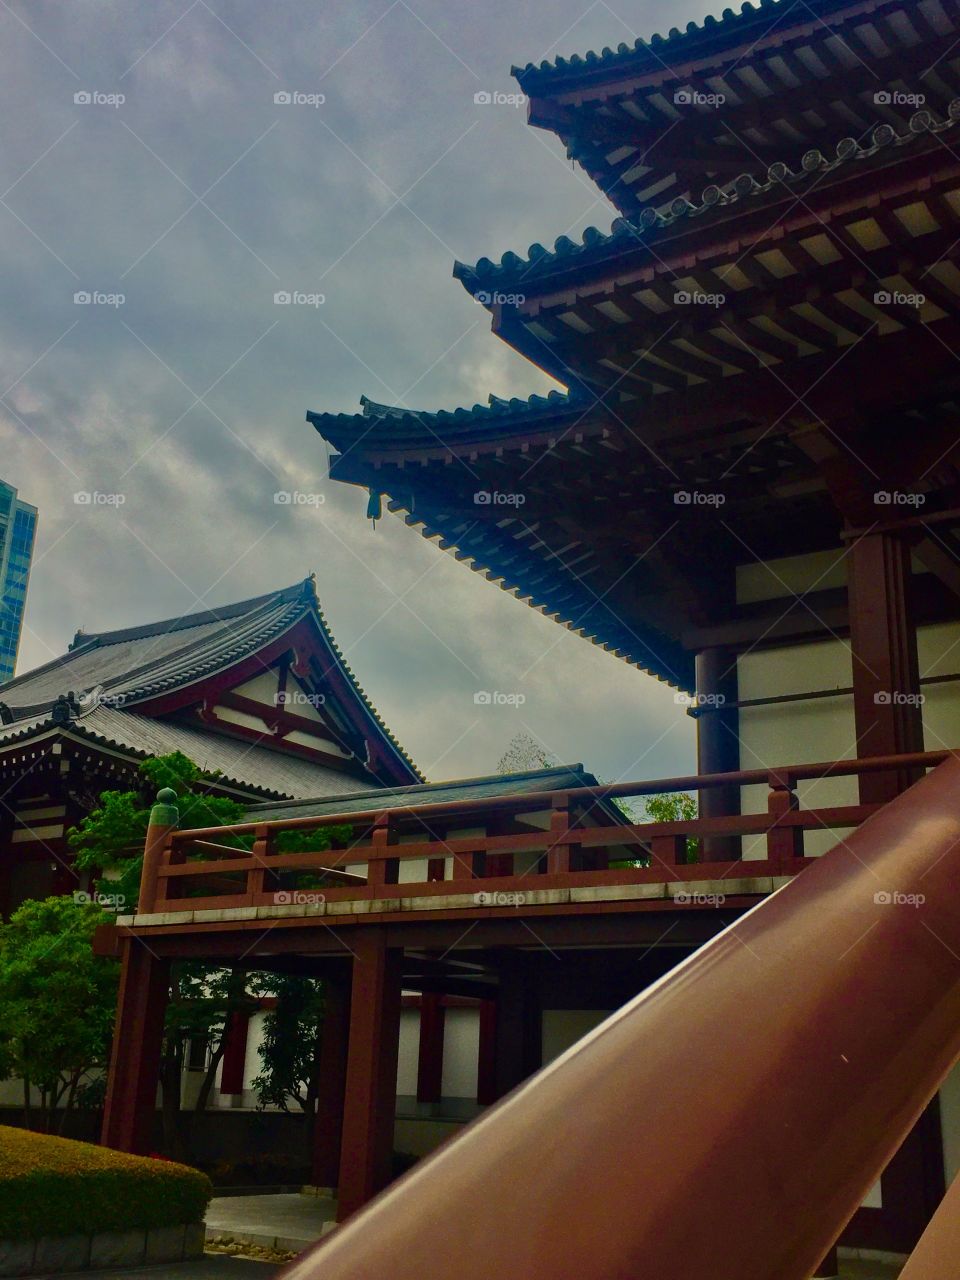 Many Roof Tops.  The Chief Temple of the Jodo. Tokyo, Japan